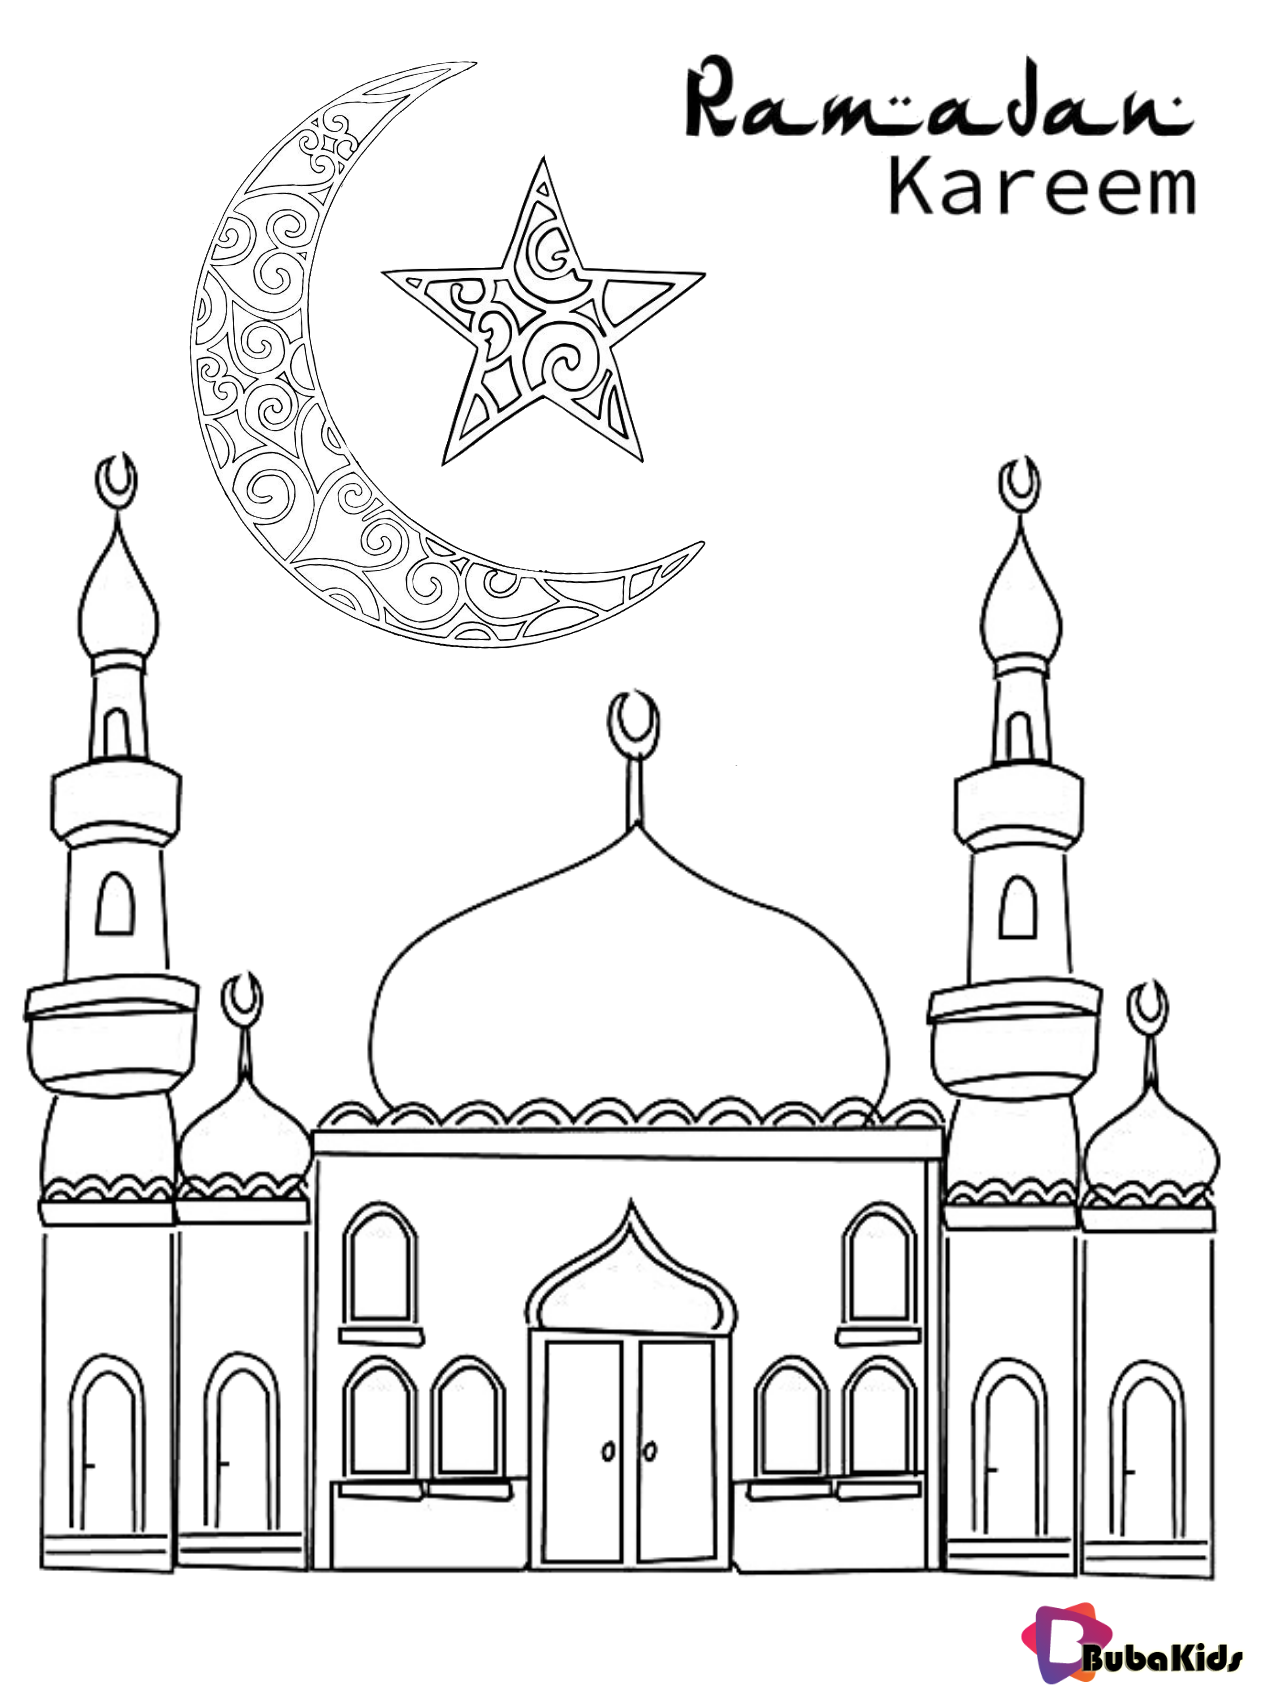 Ramadan kareem mosque crescent and star coloring page Wallpaper